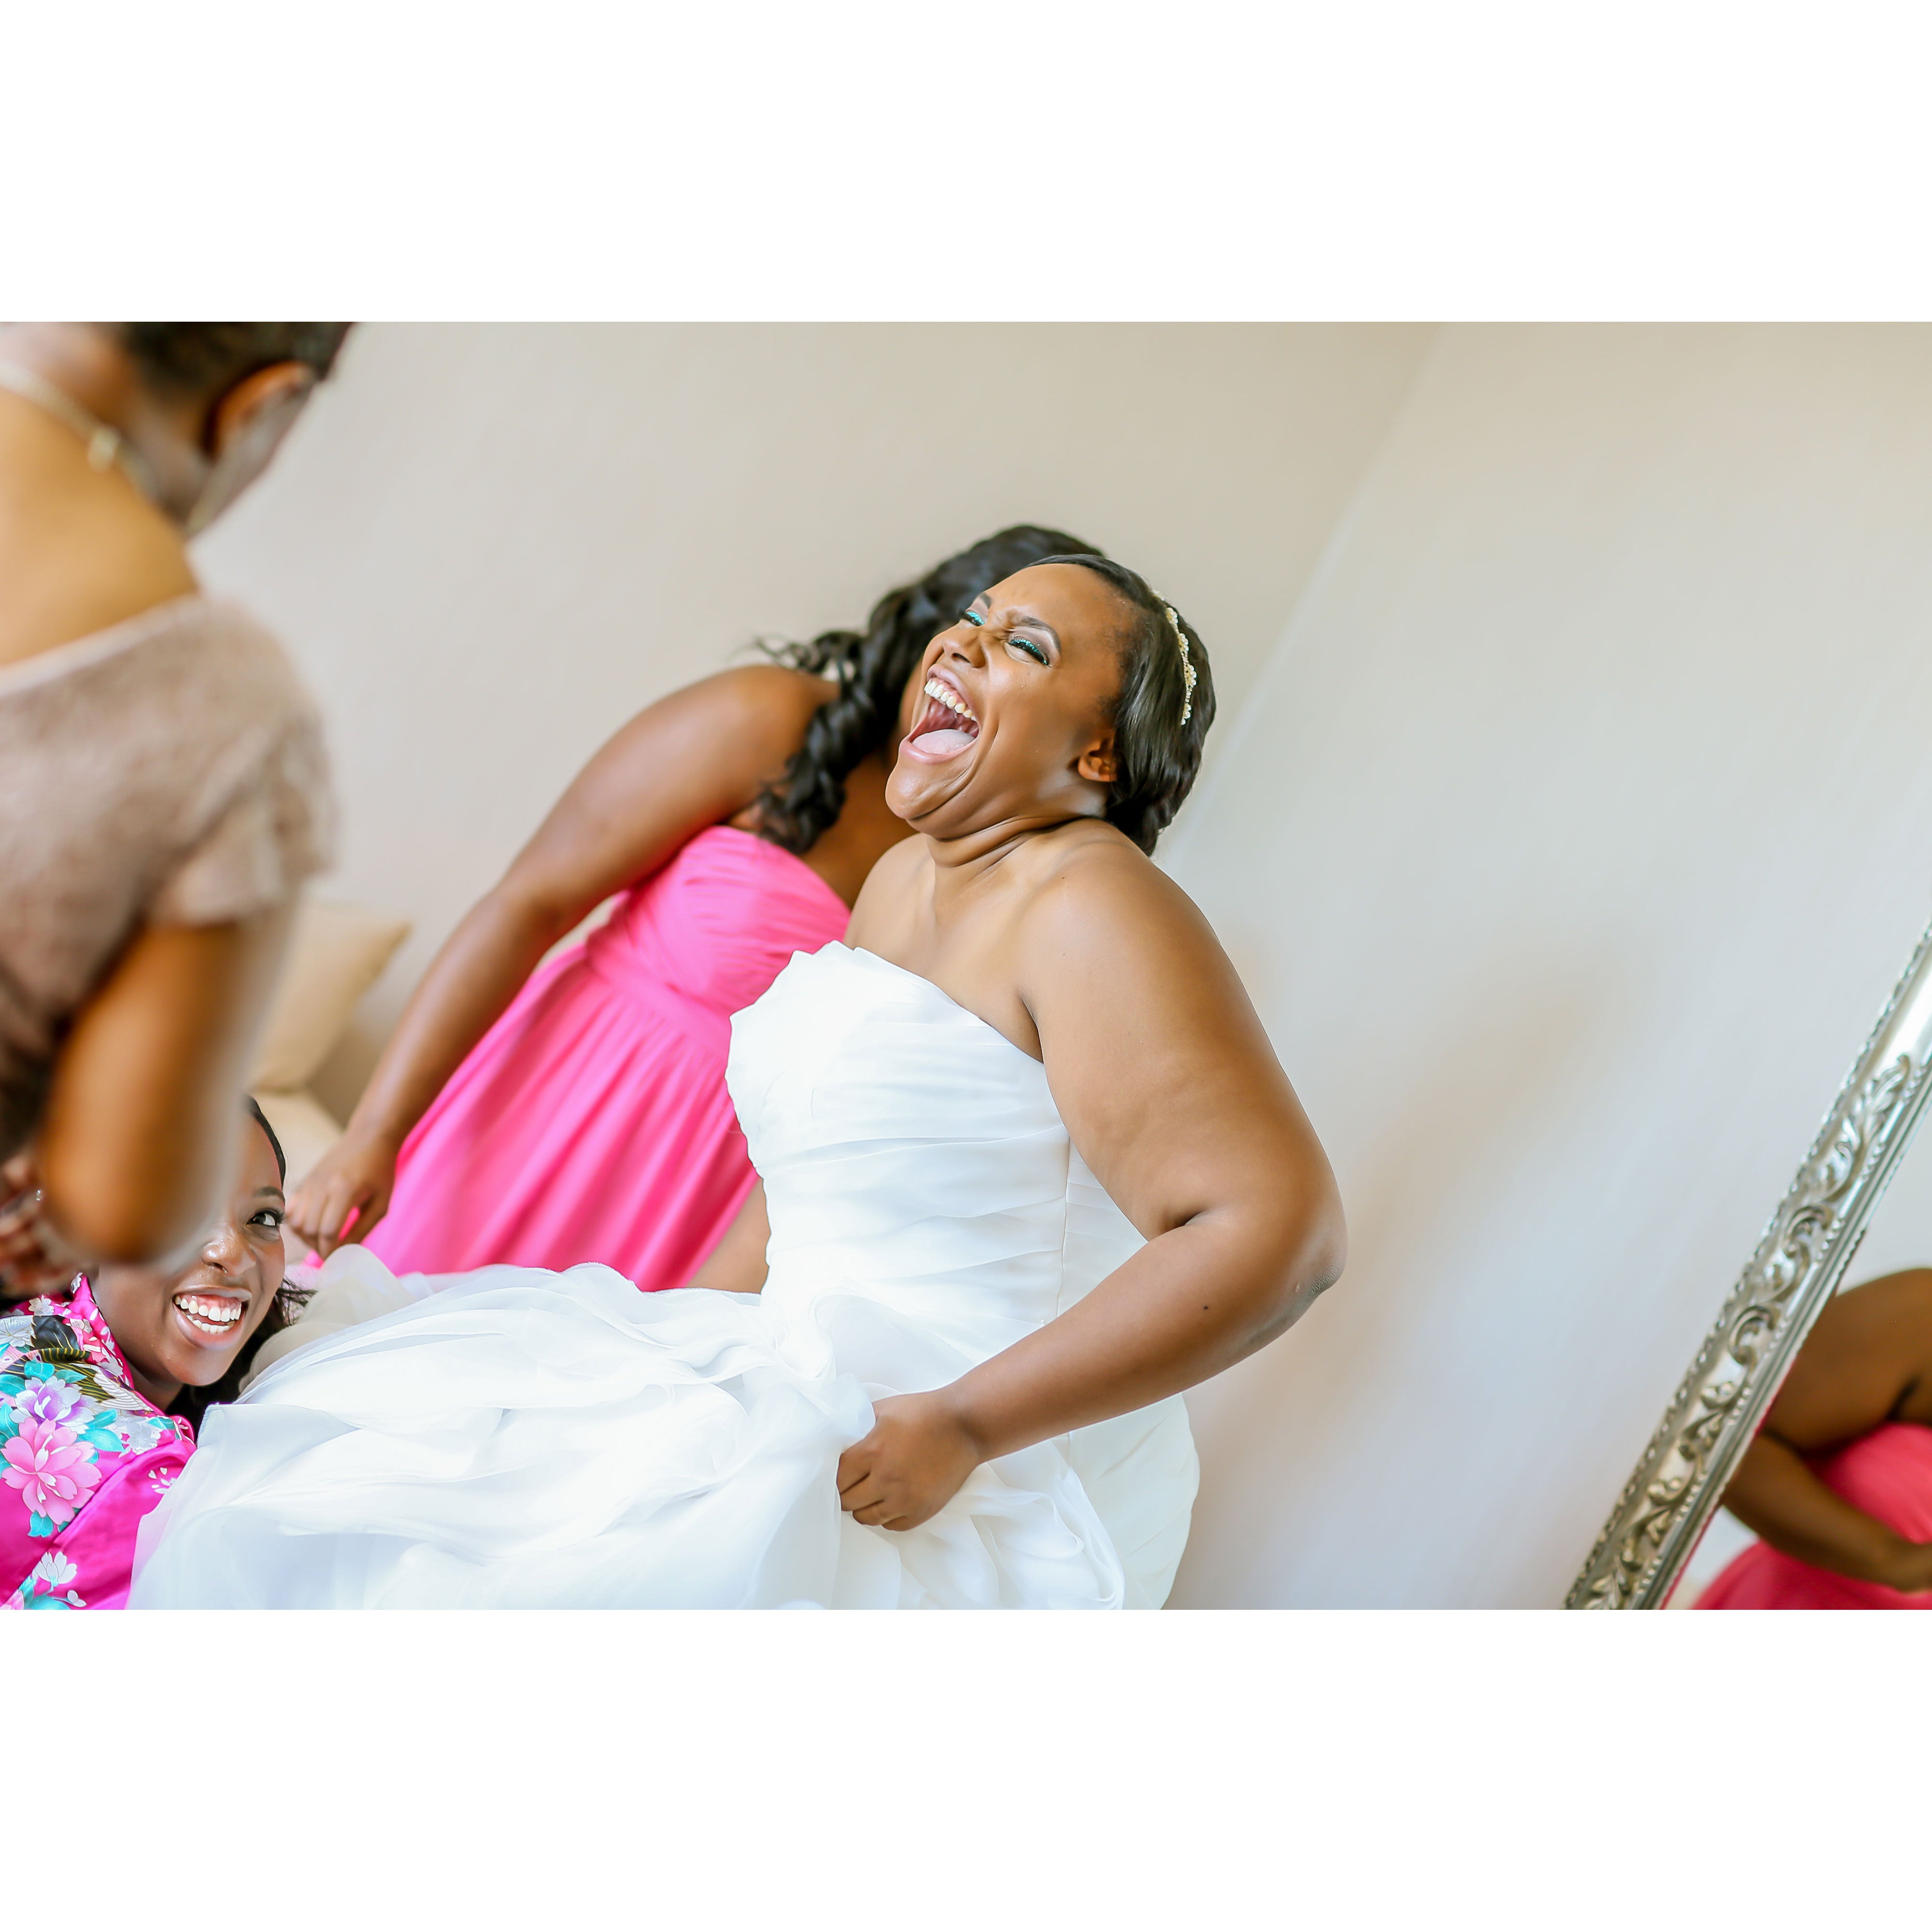 Bridal Bliss: Blaise and Nicole's Dreamy New York Wedding Style
